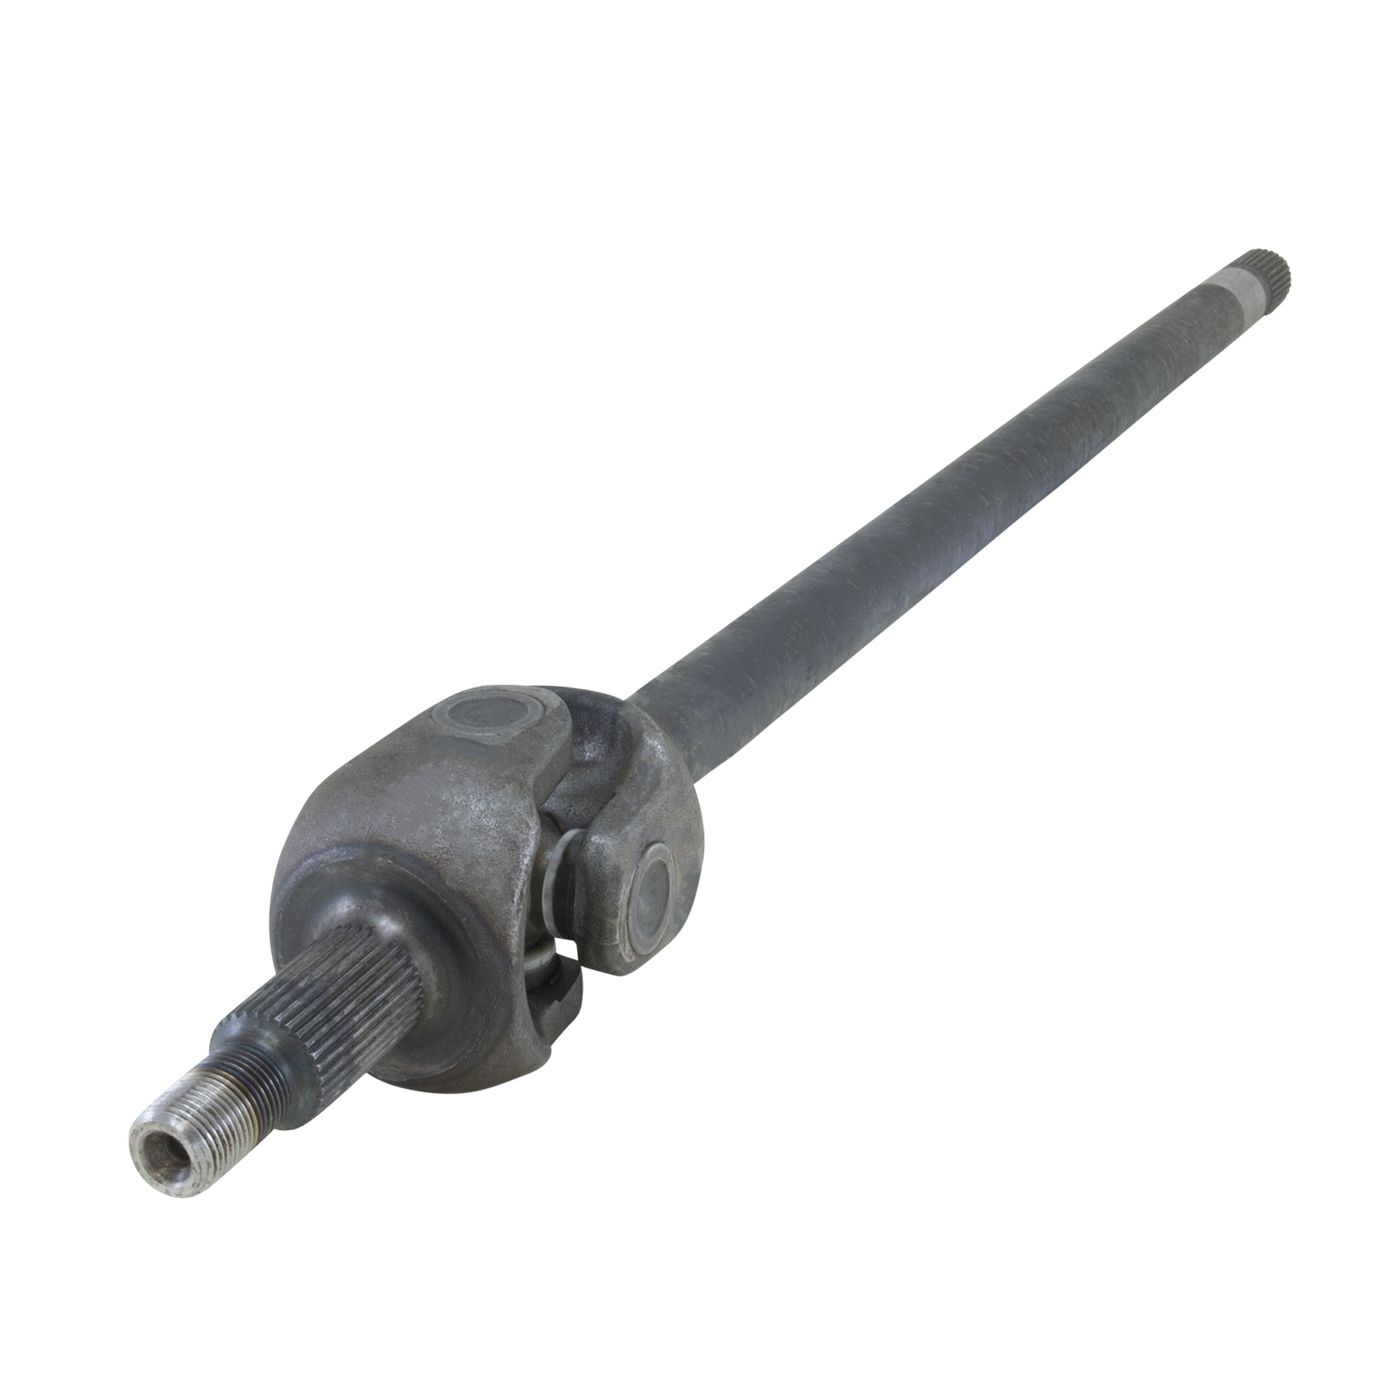 Yukon left hand axle assembly for '10-'13 Dodge 9.25" front. 